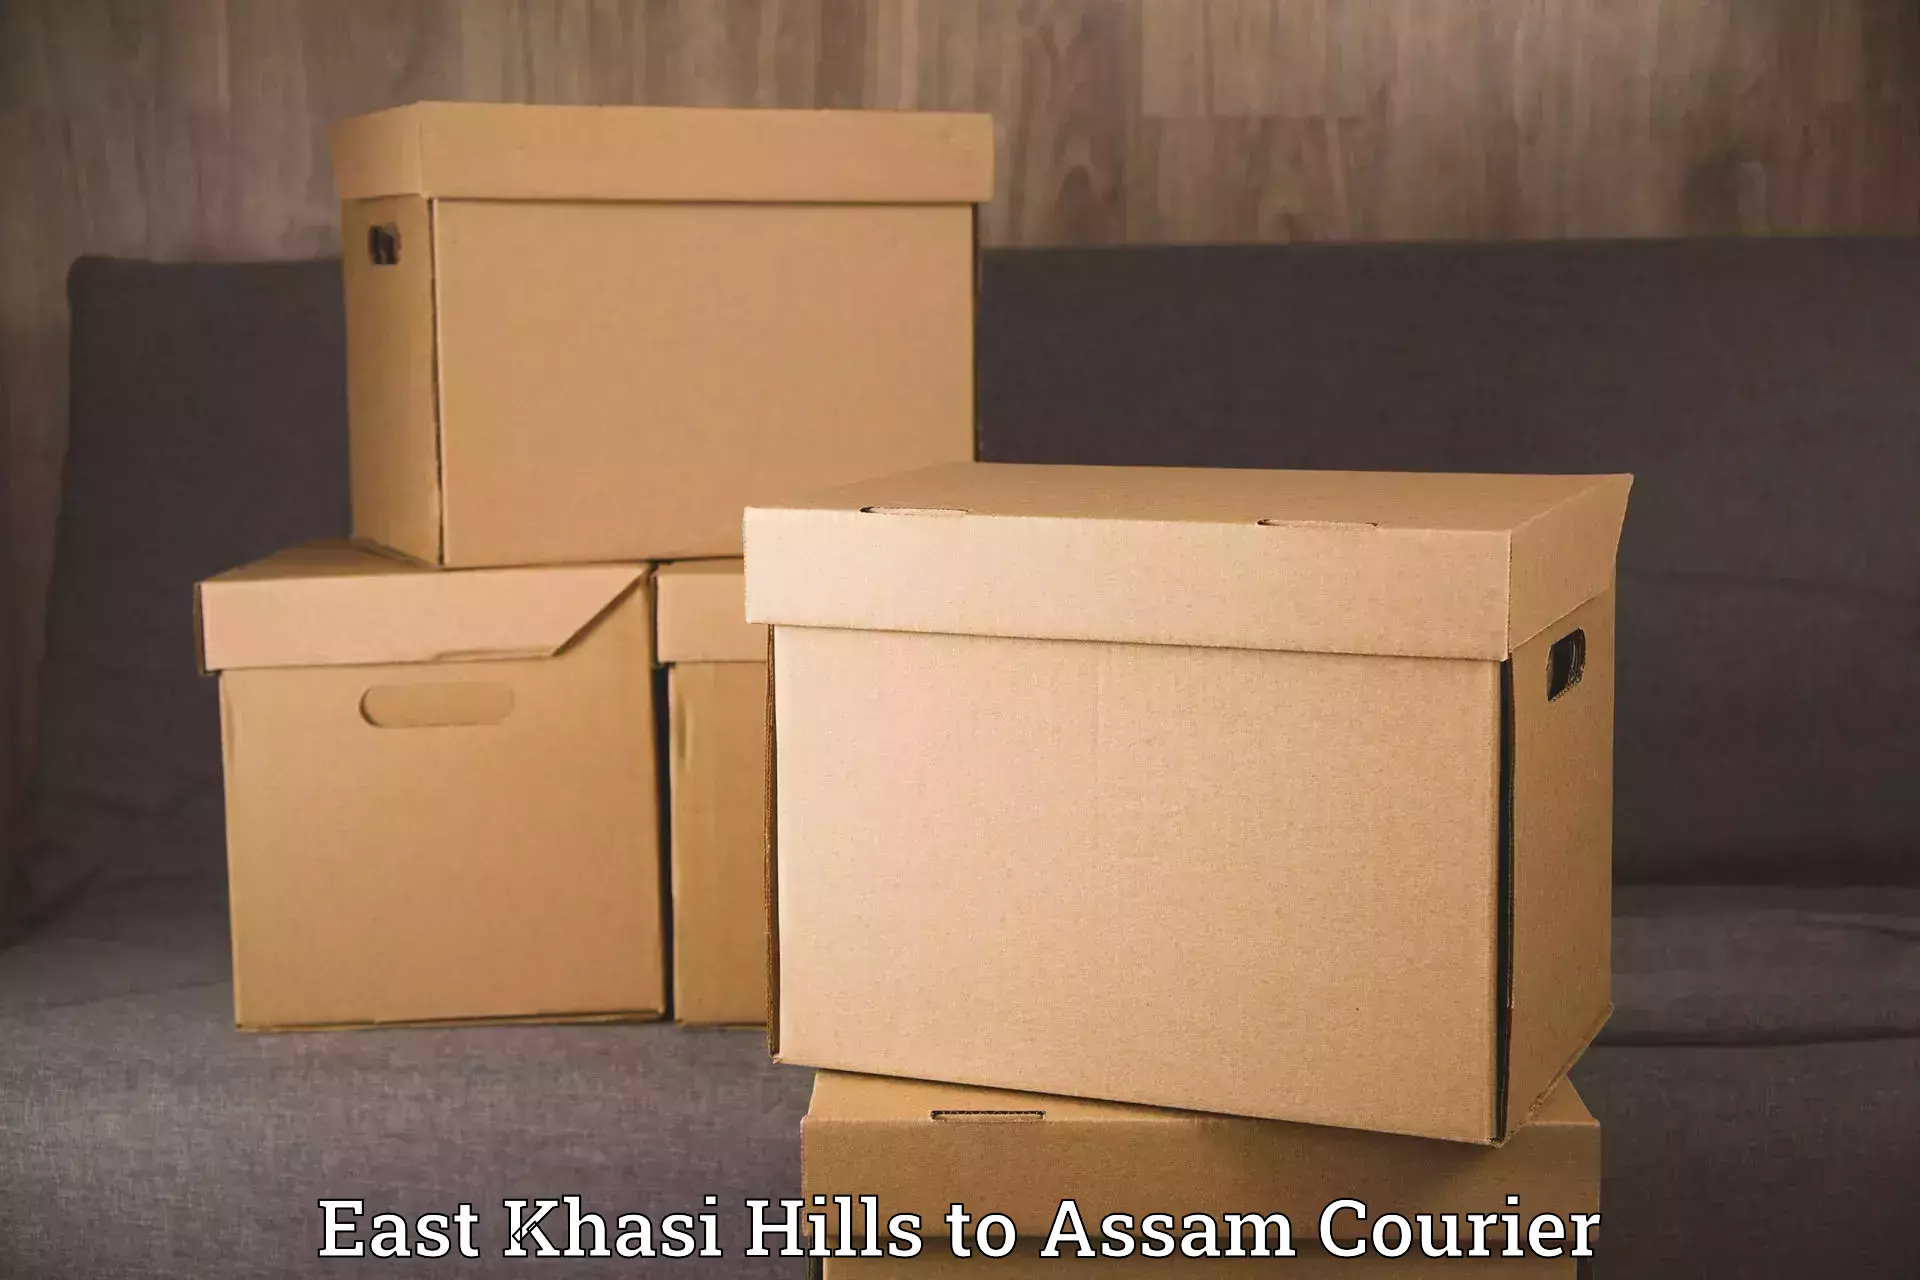 Customized relocation services in East Khasi Hills to Tezpur University